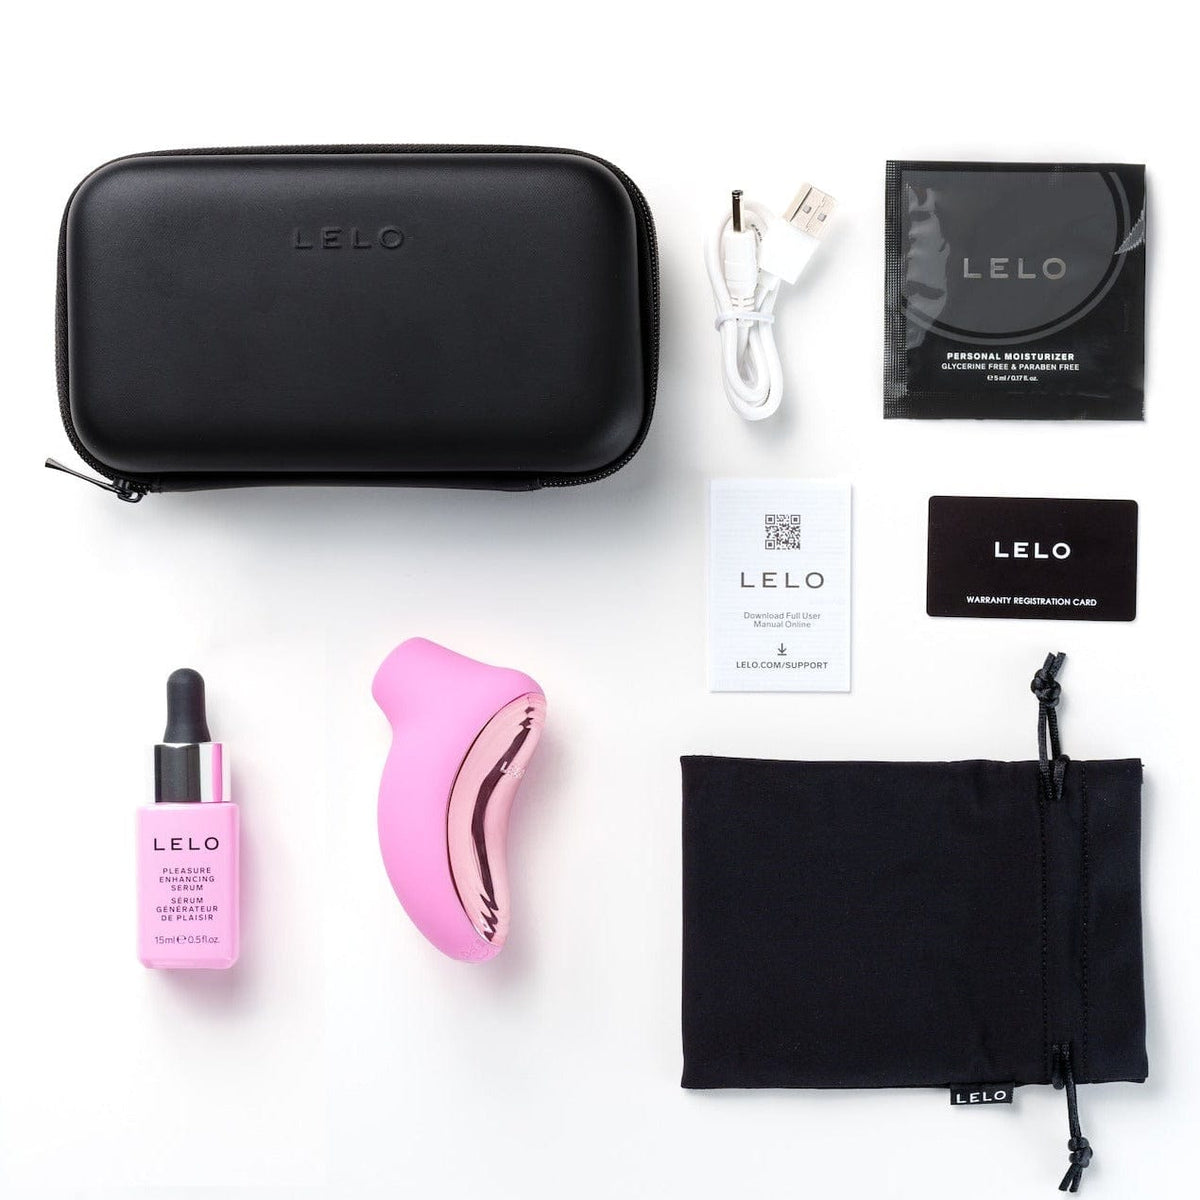 LELO - Pleasure On The Go Kit B Sona 2 Sonic Clitoral Massager with Pleasure Enhancing Serum - Pink Clit Massager (Vibration) Rechargeable 714019367 Durio.sg